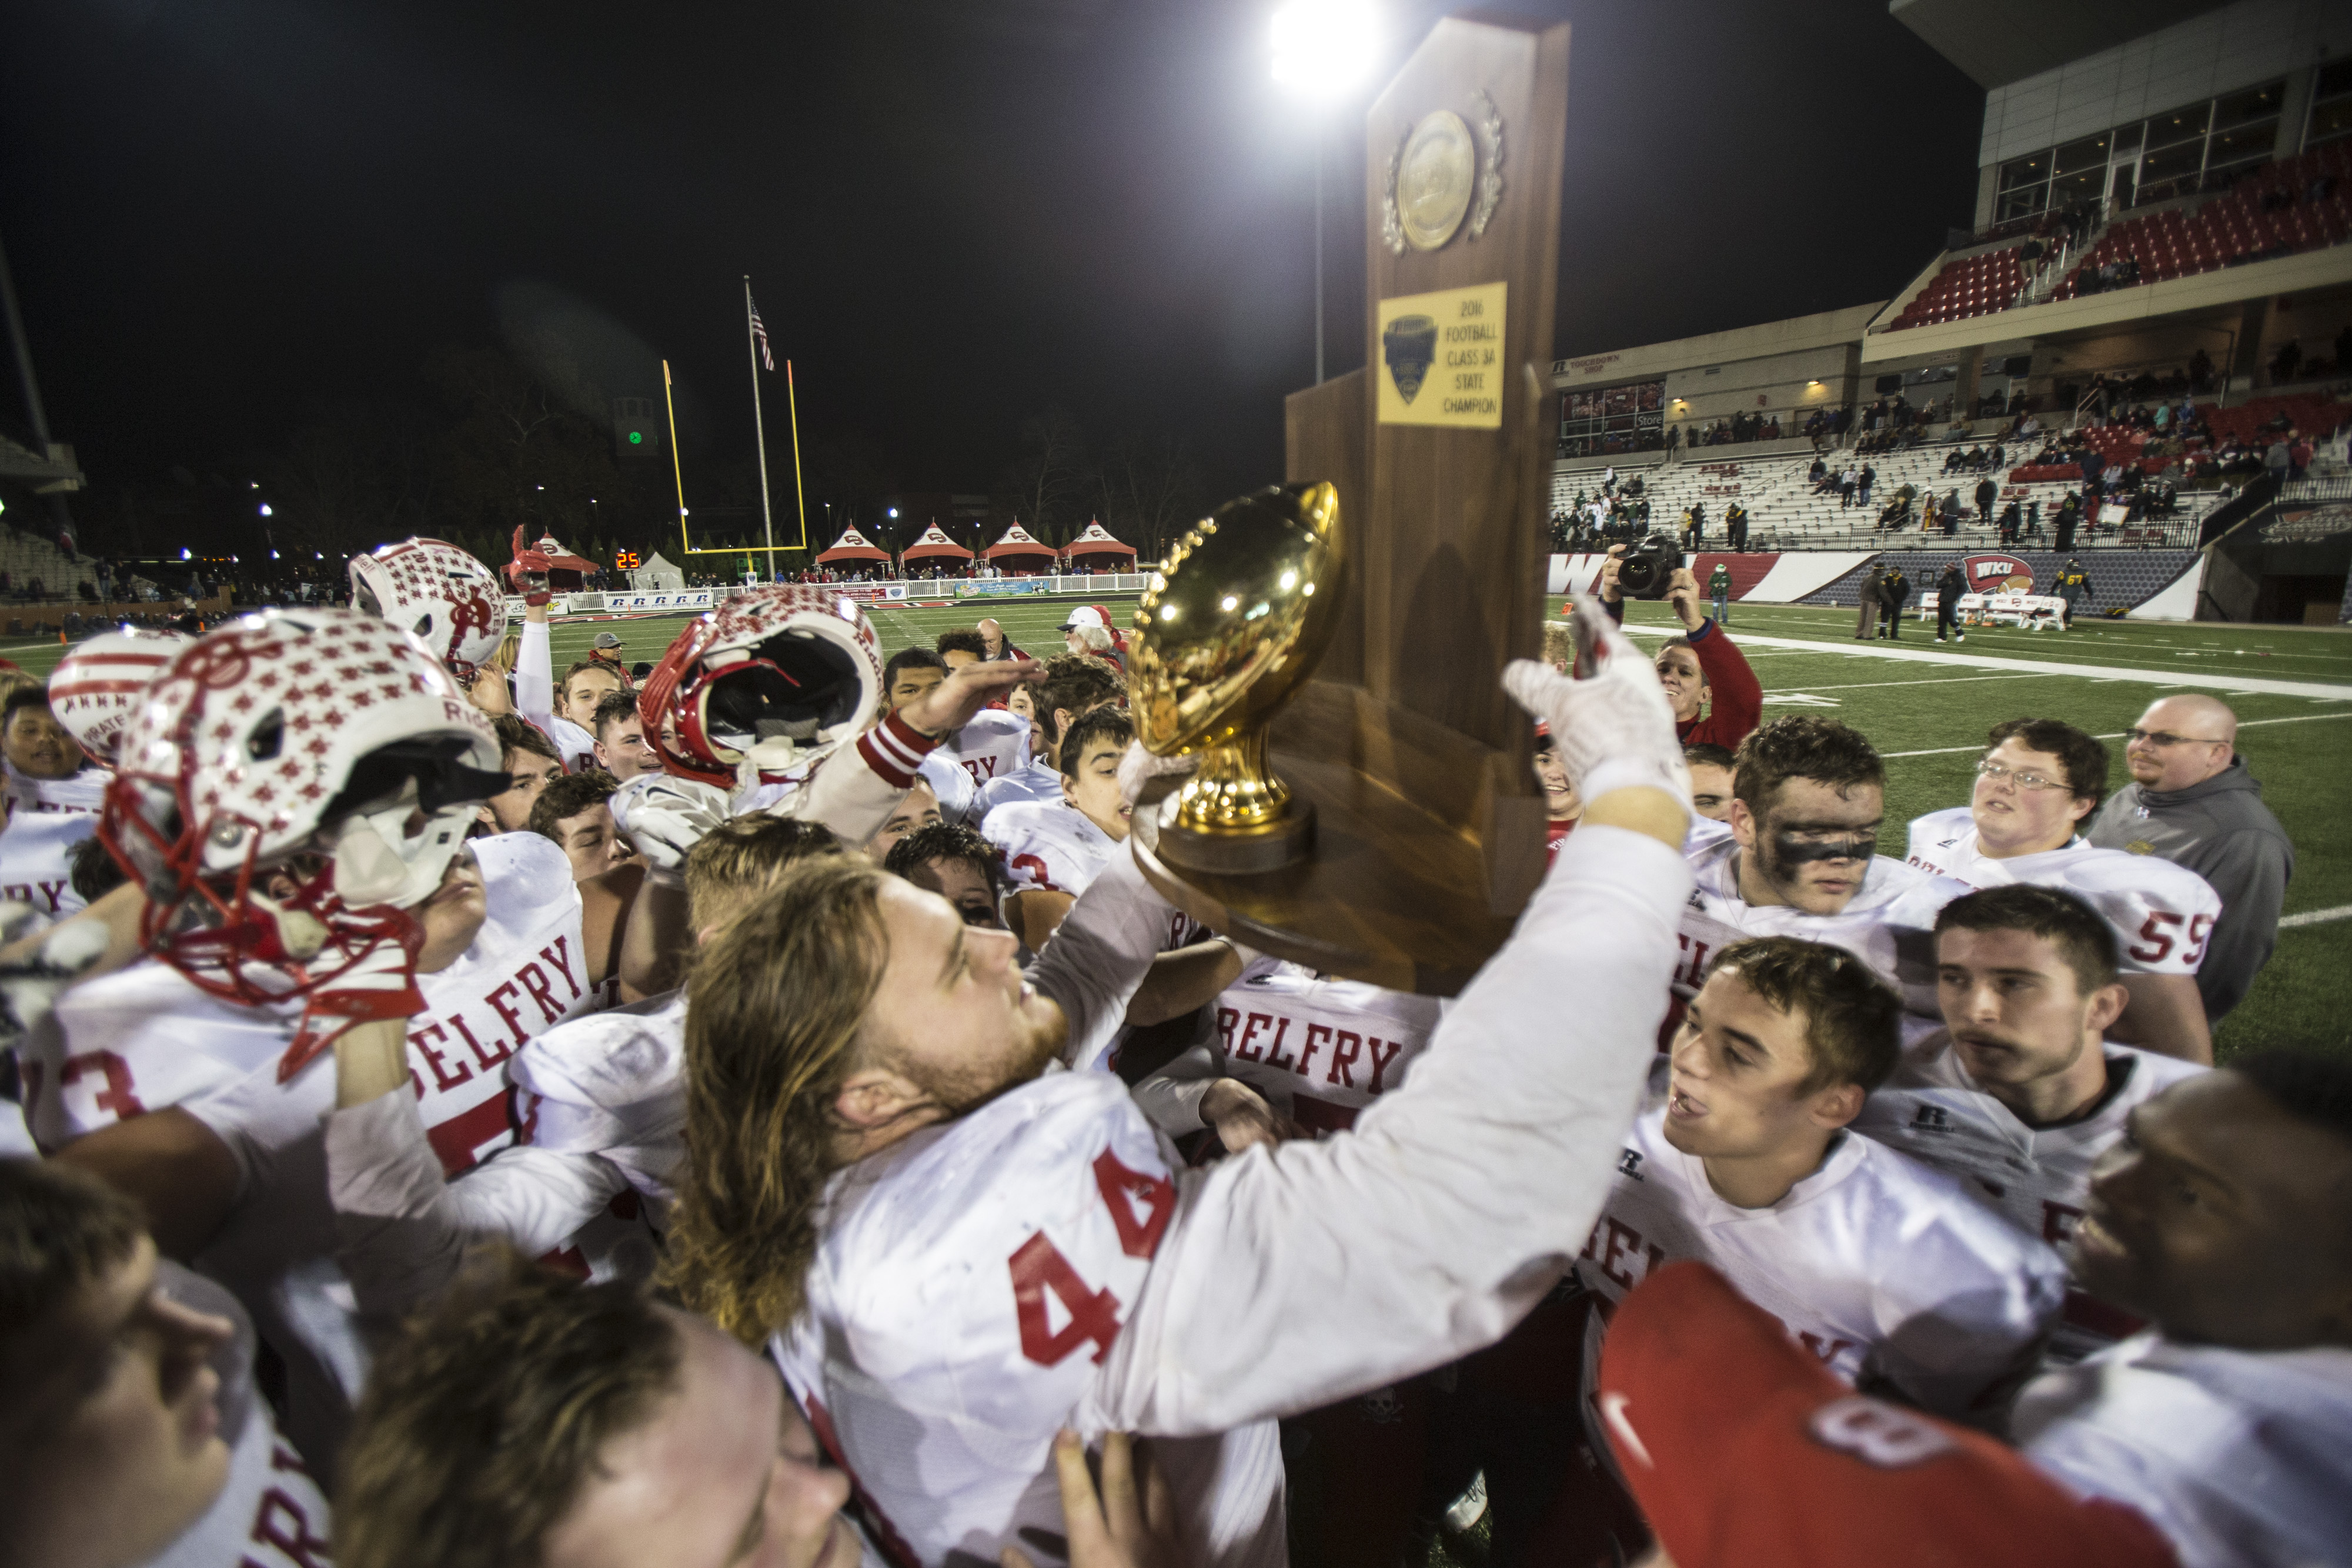 Belfry football players celebrate after a 52-31 victory over Louisville's Central High School to claim the Class 3A State Championship. Dec. 3, 2016